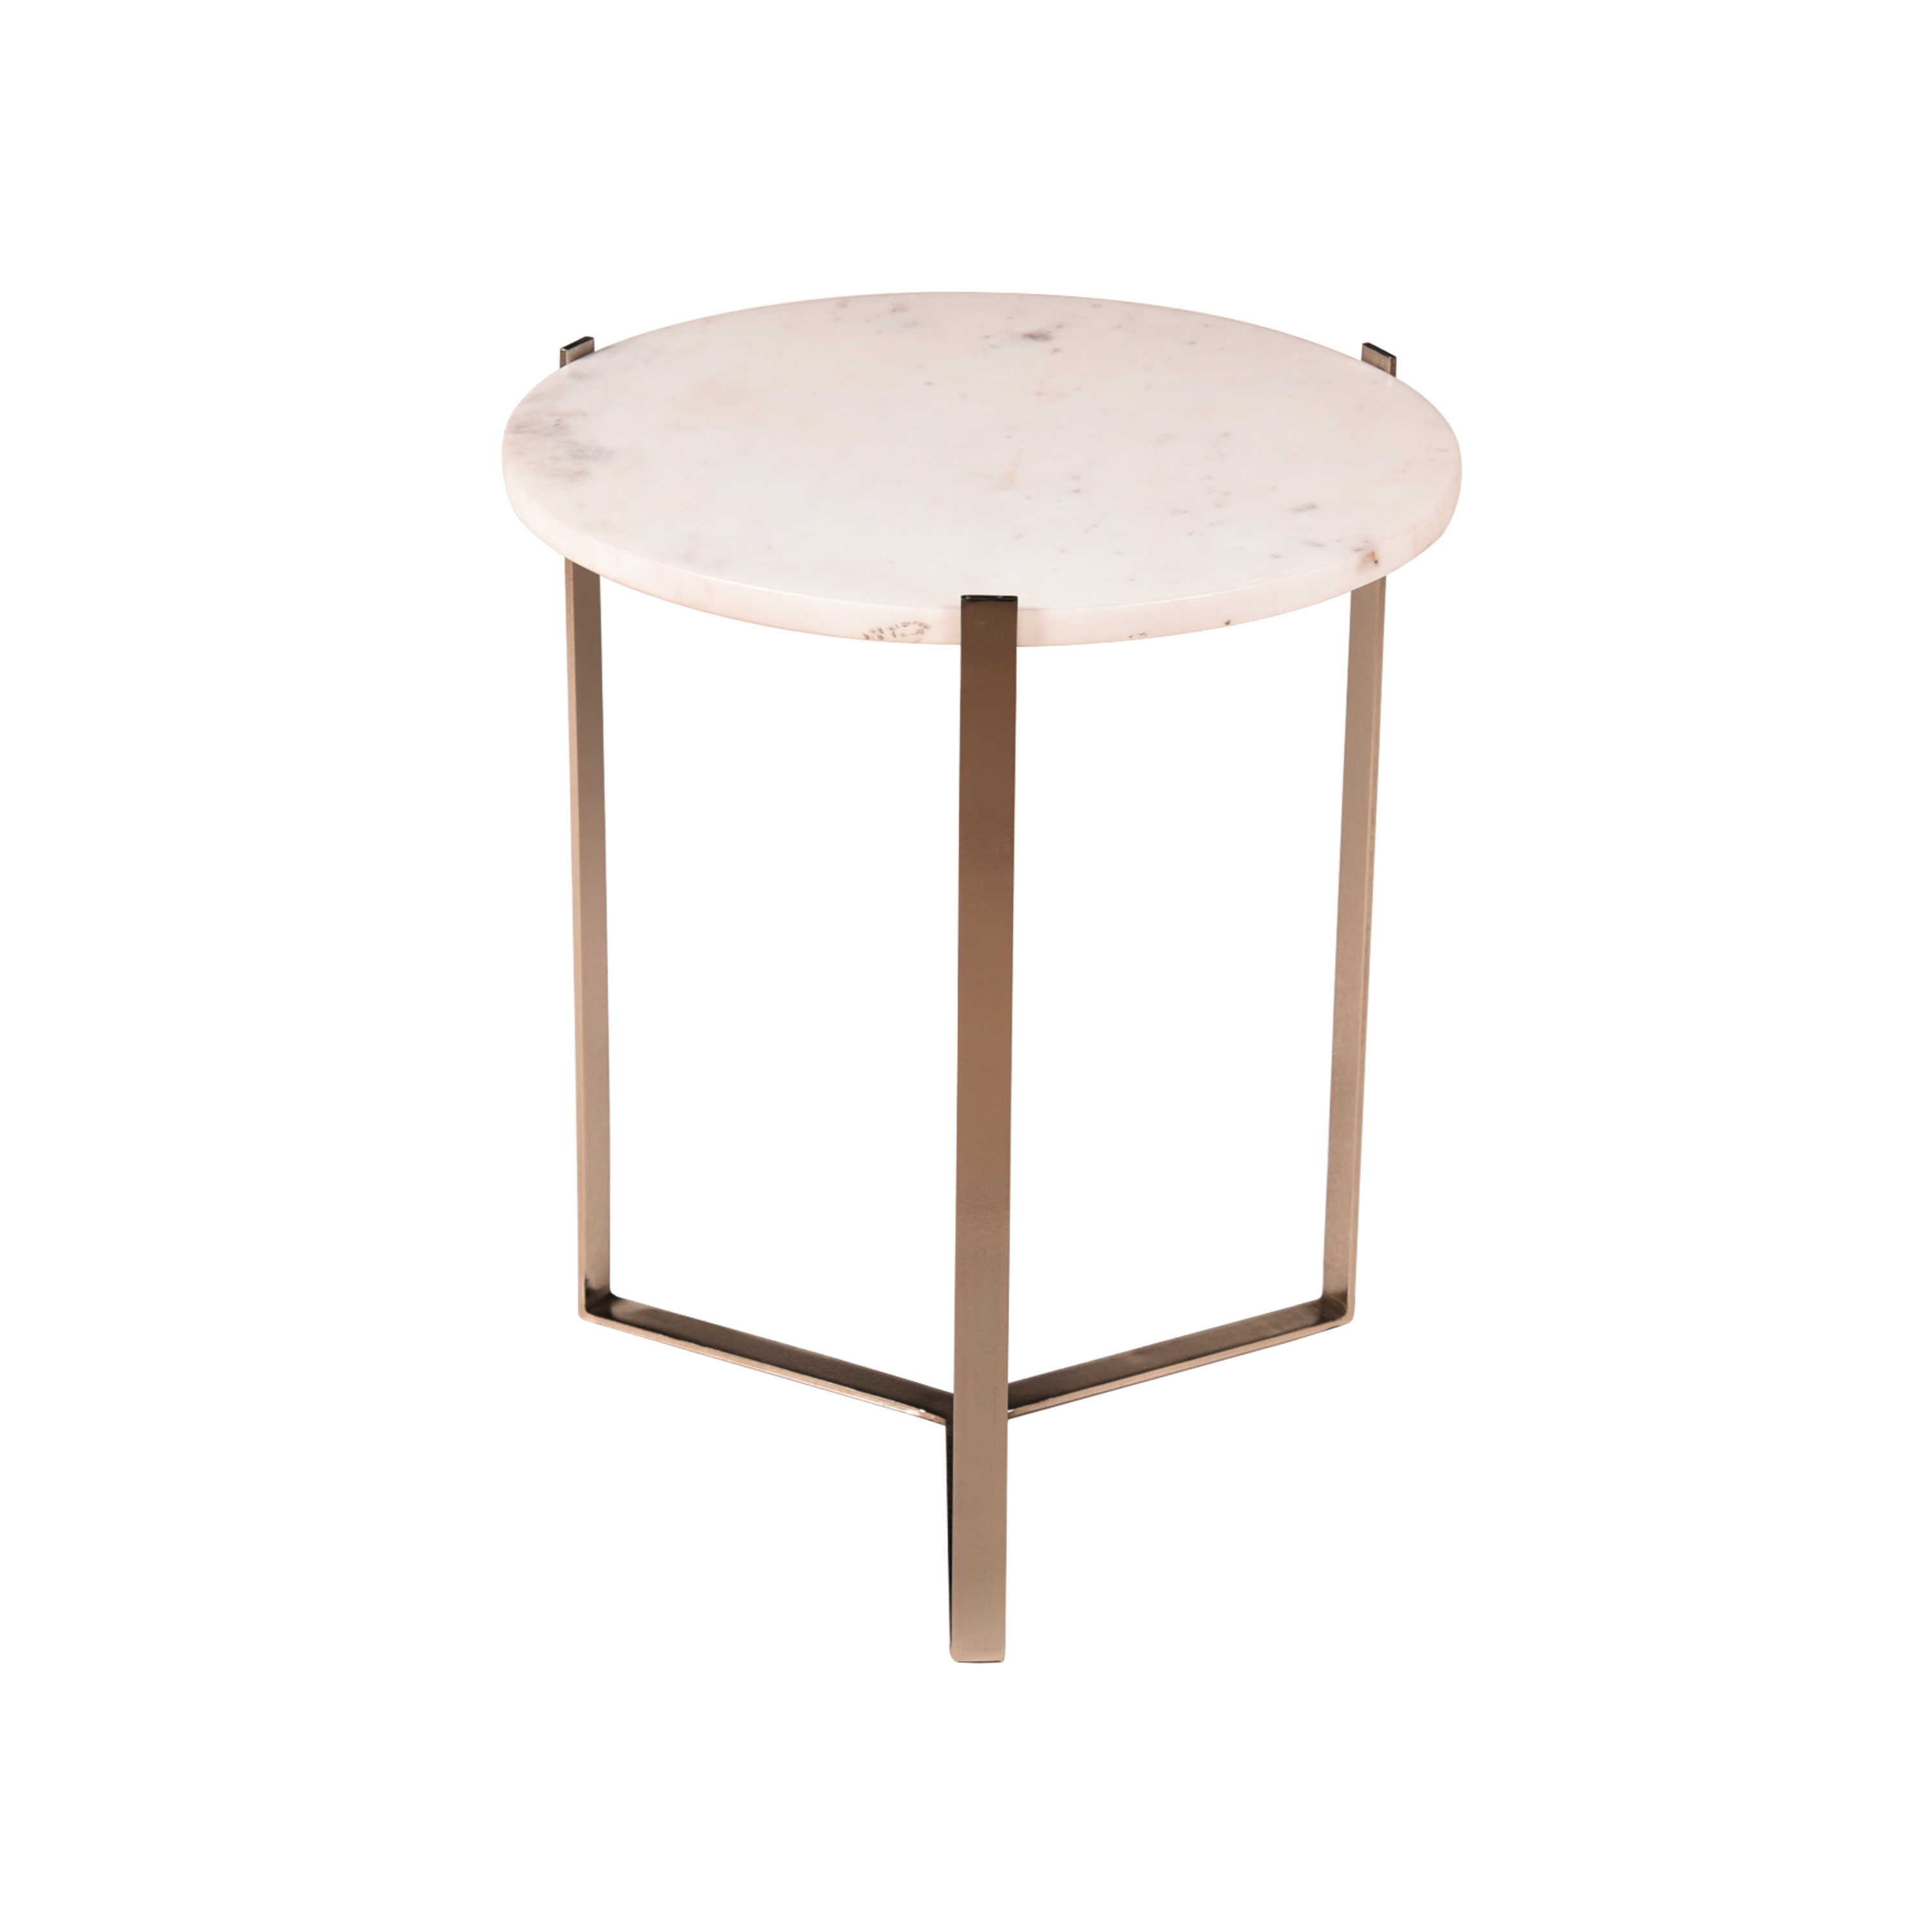 Nola Nikkel and Marble Side Table